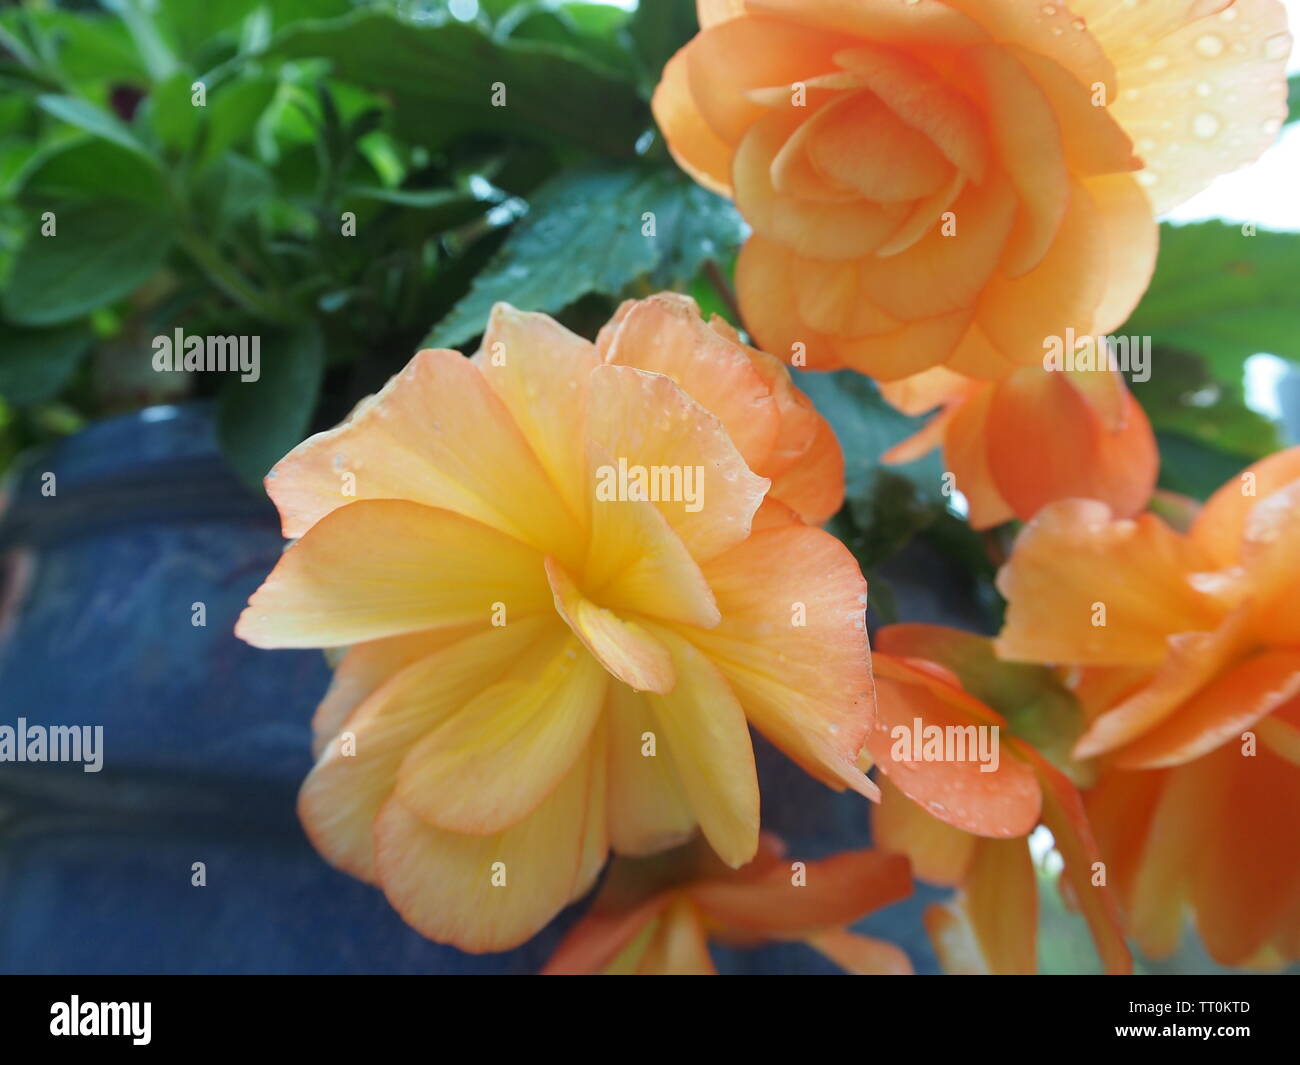 Yellow and orange begonia flowers in bloom Stock Photo